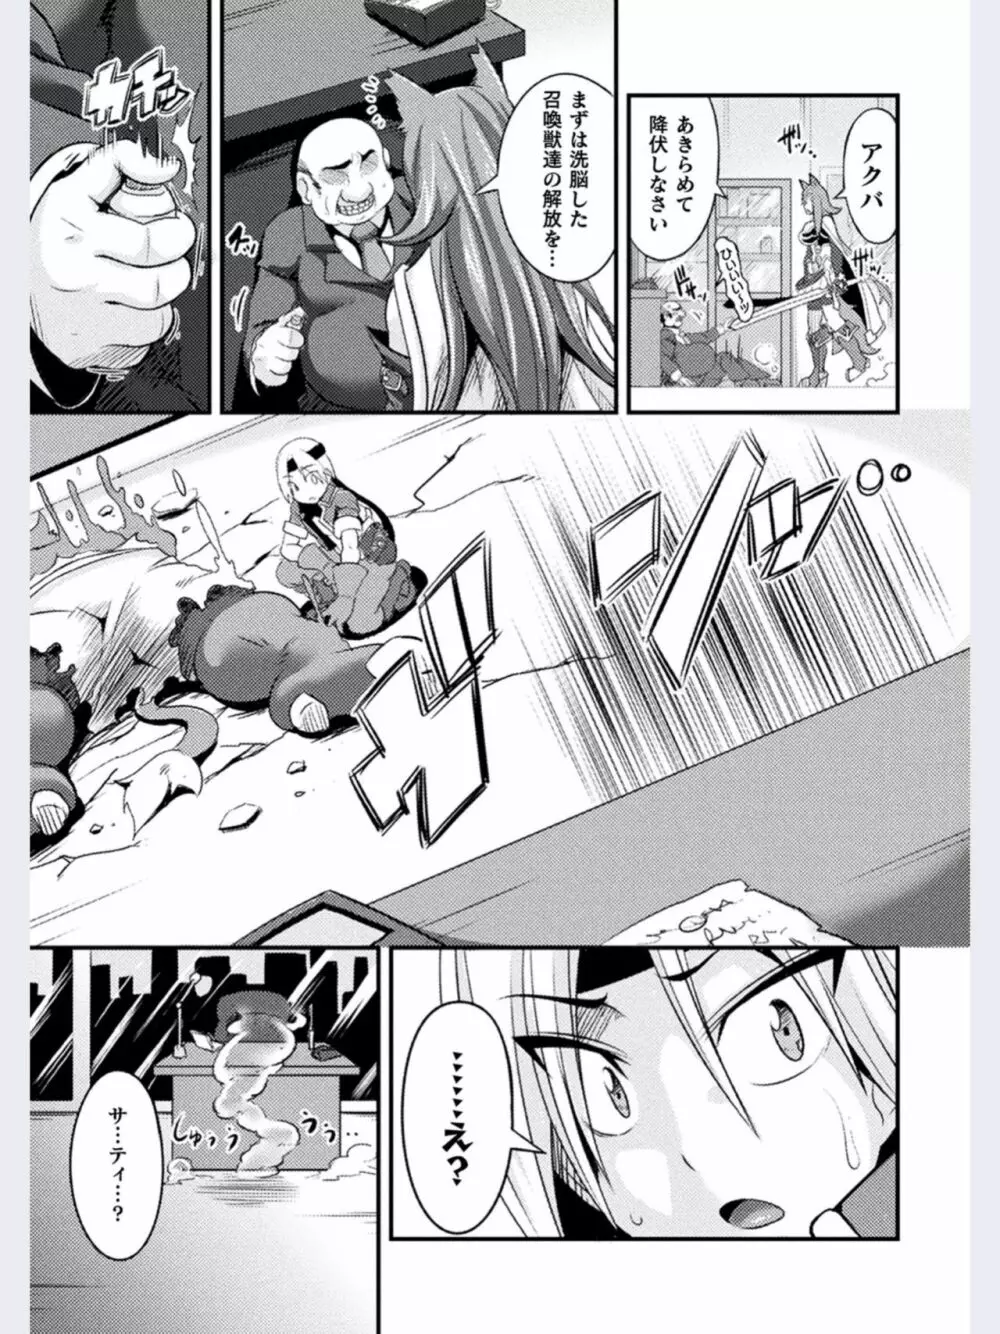 LOVE METER〜寝取られた相棒〜 #1 Page.5